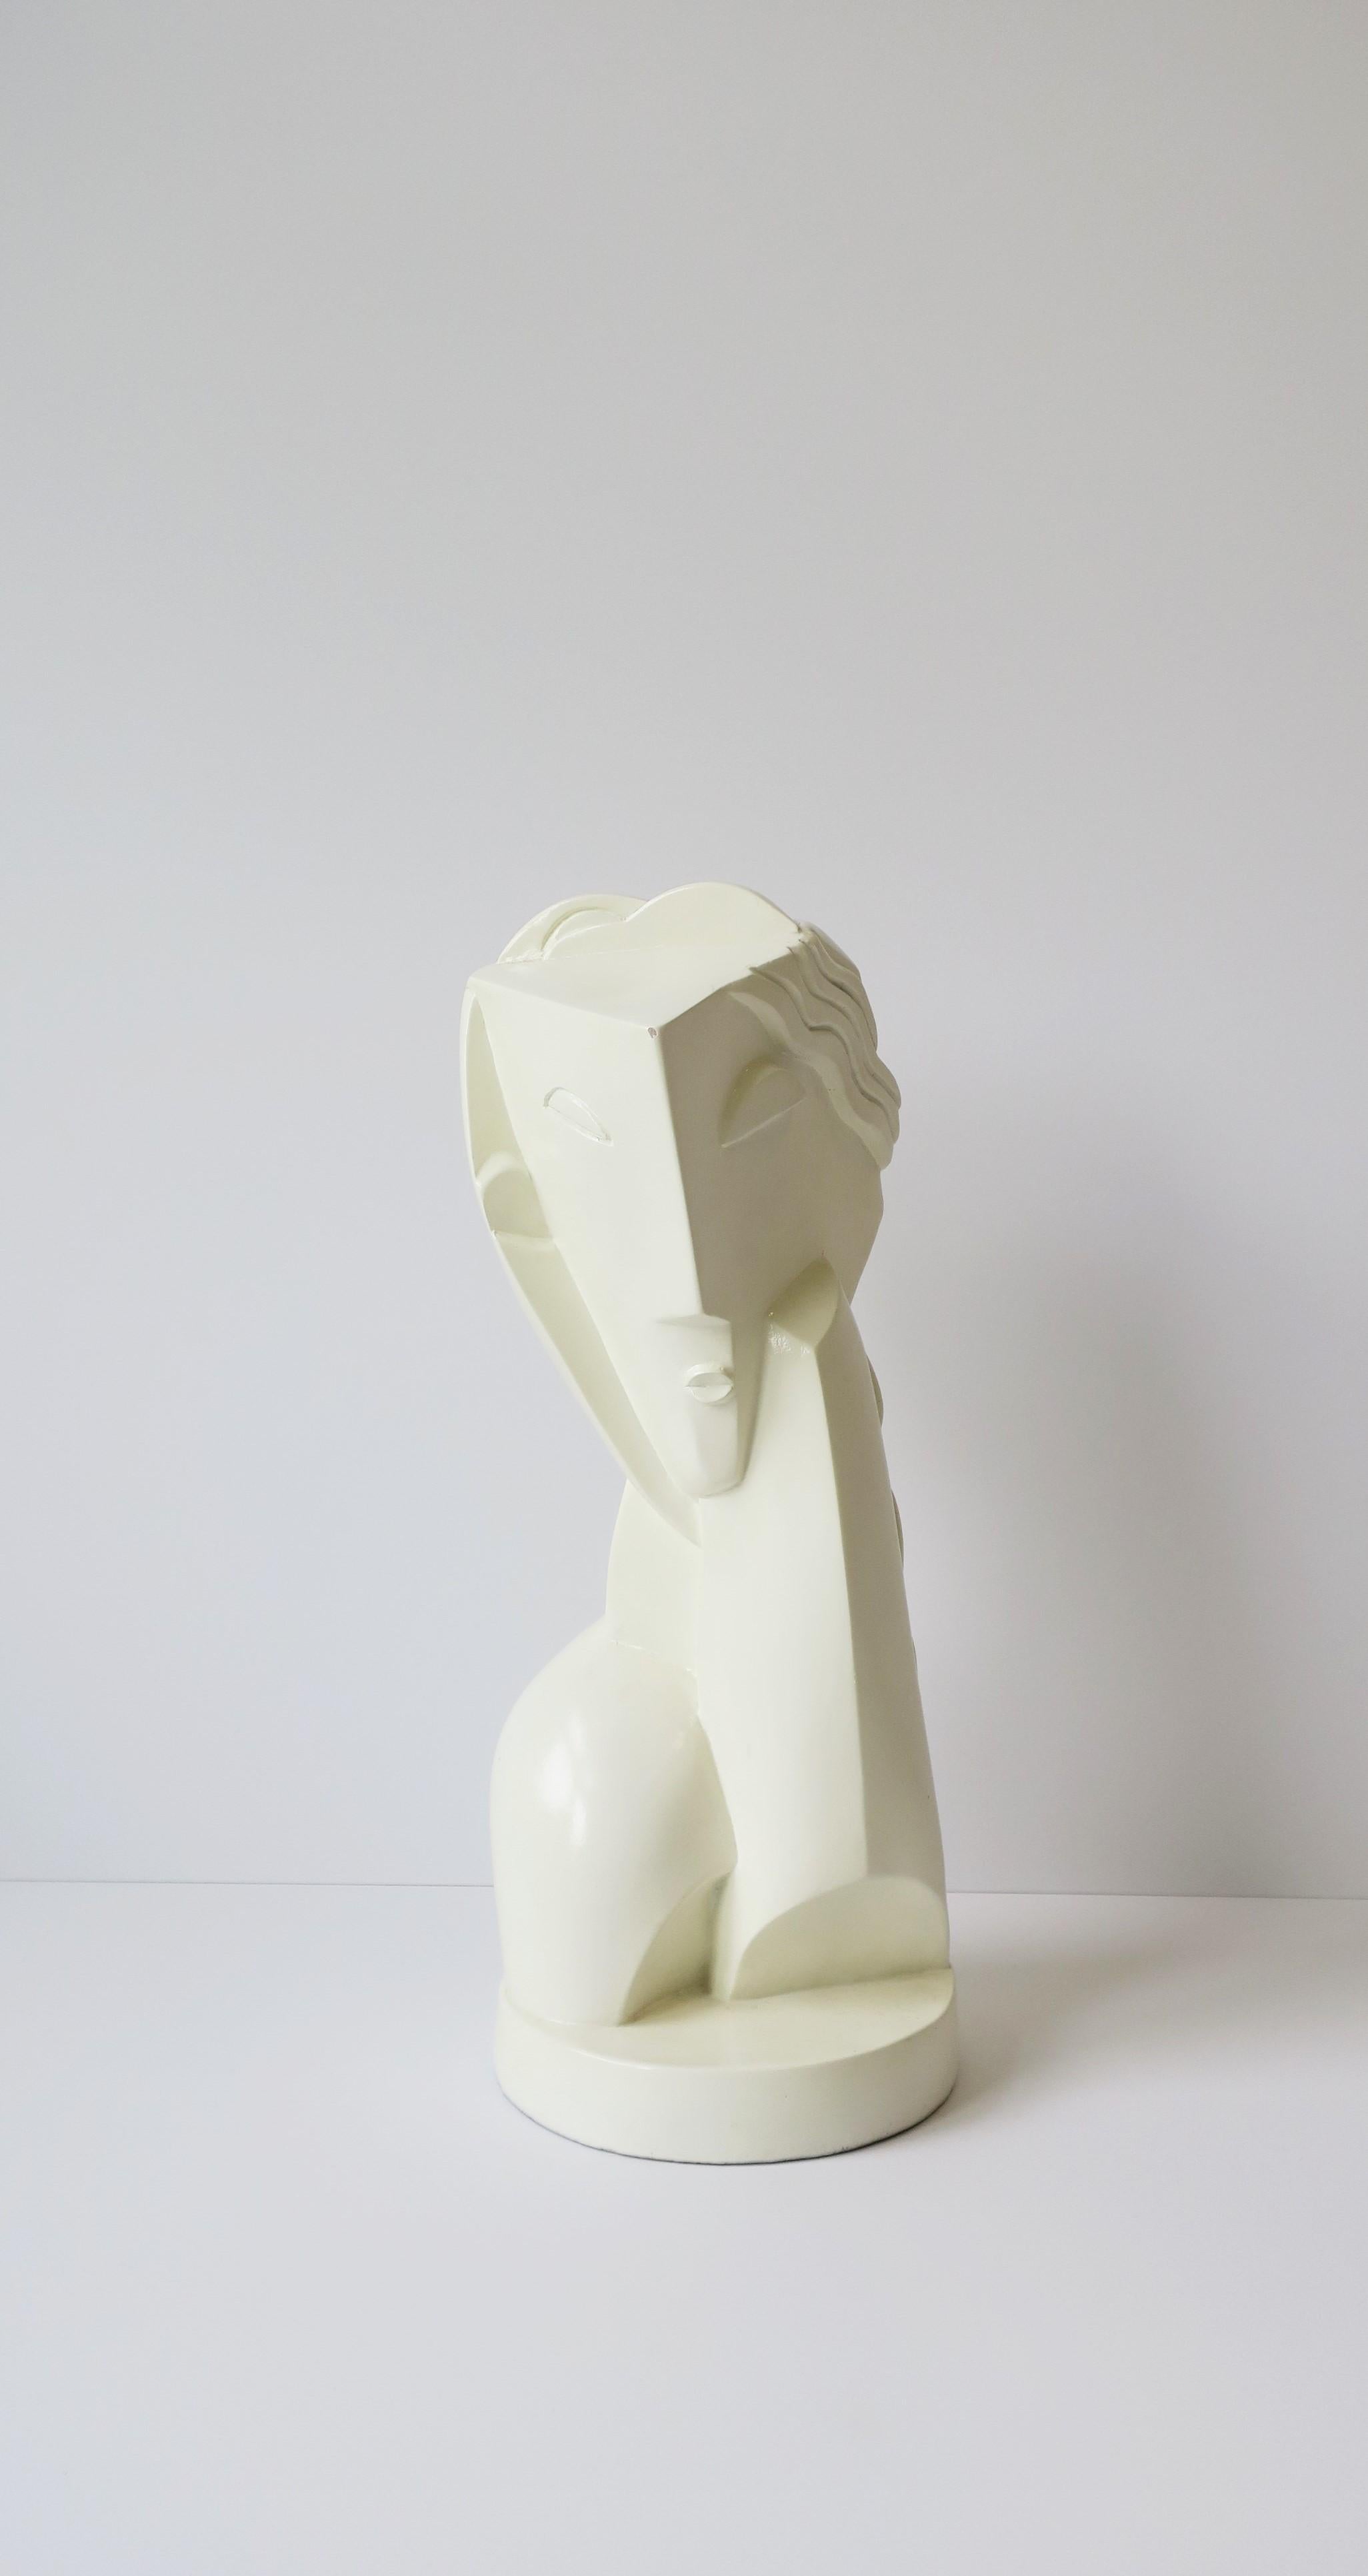 A beautiful Art Deco modern cubist figurative bust sculpture piece, 1961, England. This piece was made in 1961, as marked, a reproduction from the early 20th century Art Deco modern period. Beautiful at every angle. Piece is a gloss ceramic in an